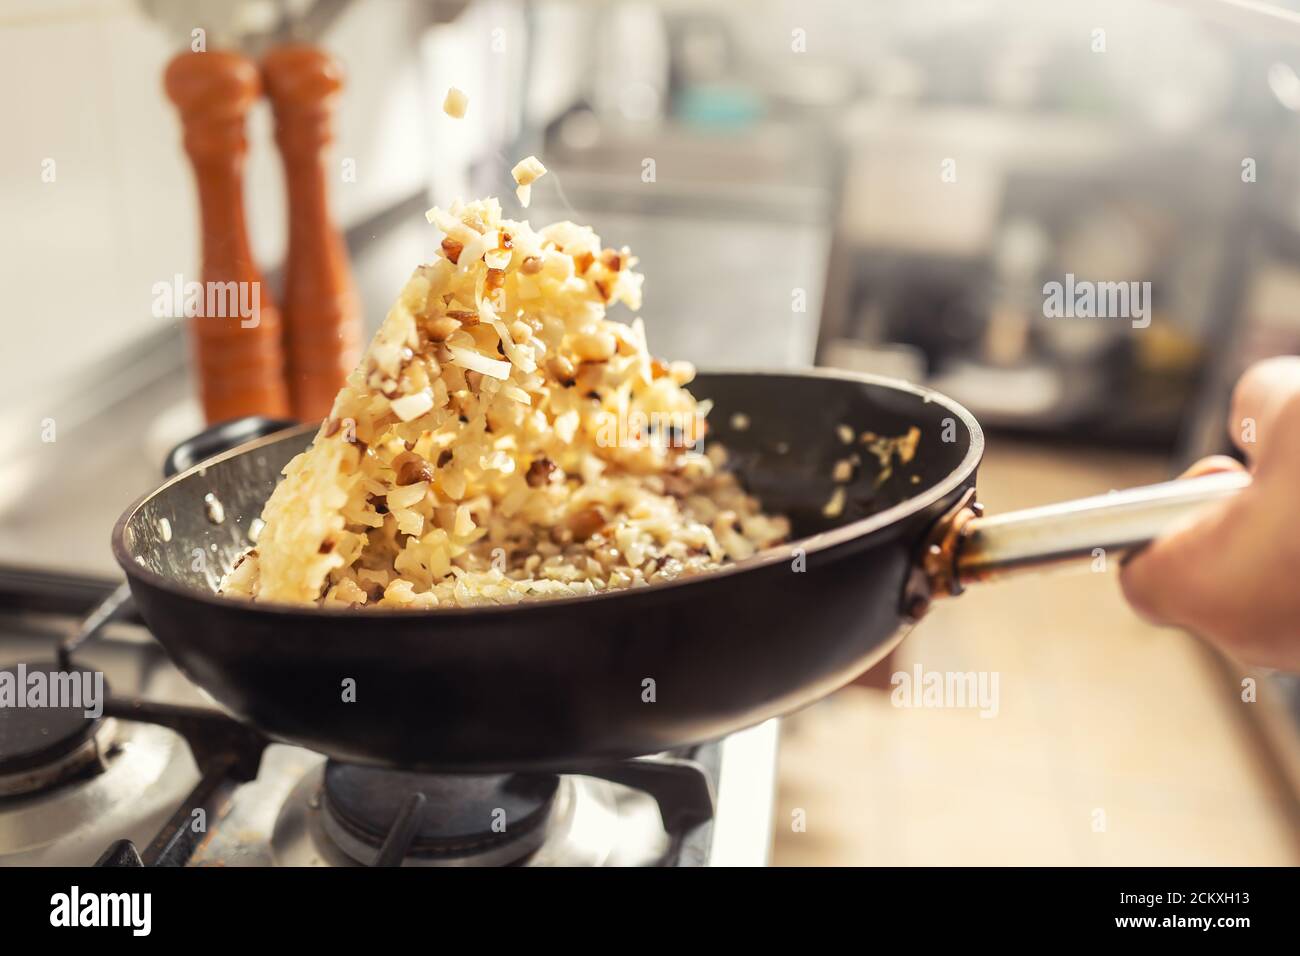 https://c8.alamy.com/comp/2CKXH13/onions-and-bacon-tossed-in-a-pan-inside-the-kitchen-khichri-tossed-in-a-wok-pan-2CKXH13.jpg